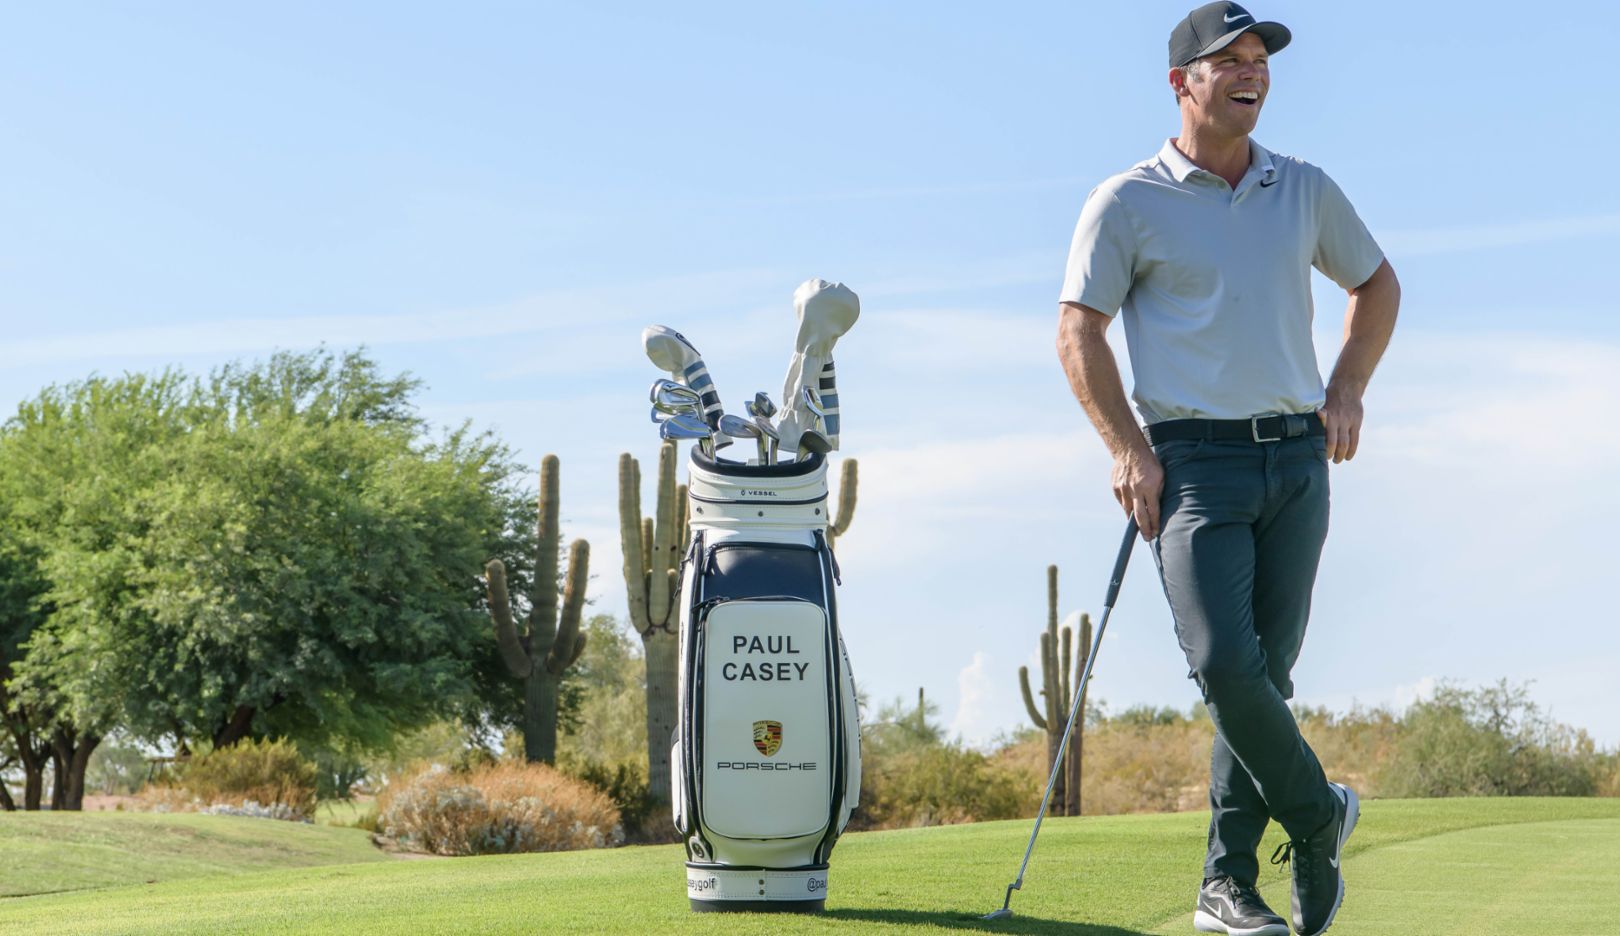 A man and his bag: Englishman Paul Casey playing on the North American PGA Tour. He has been a professional golfer for the past twenty years.